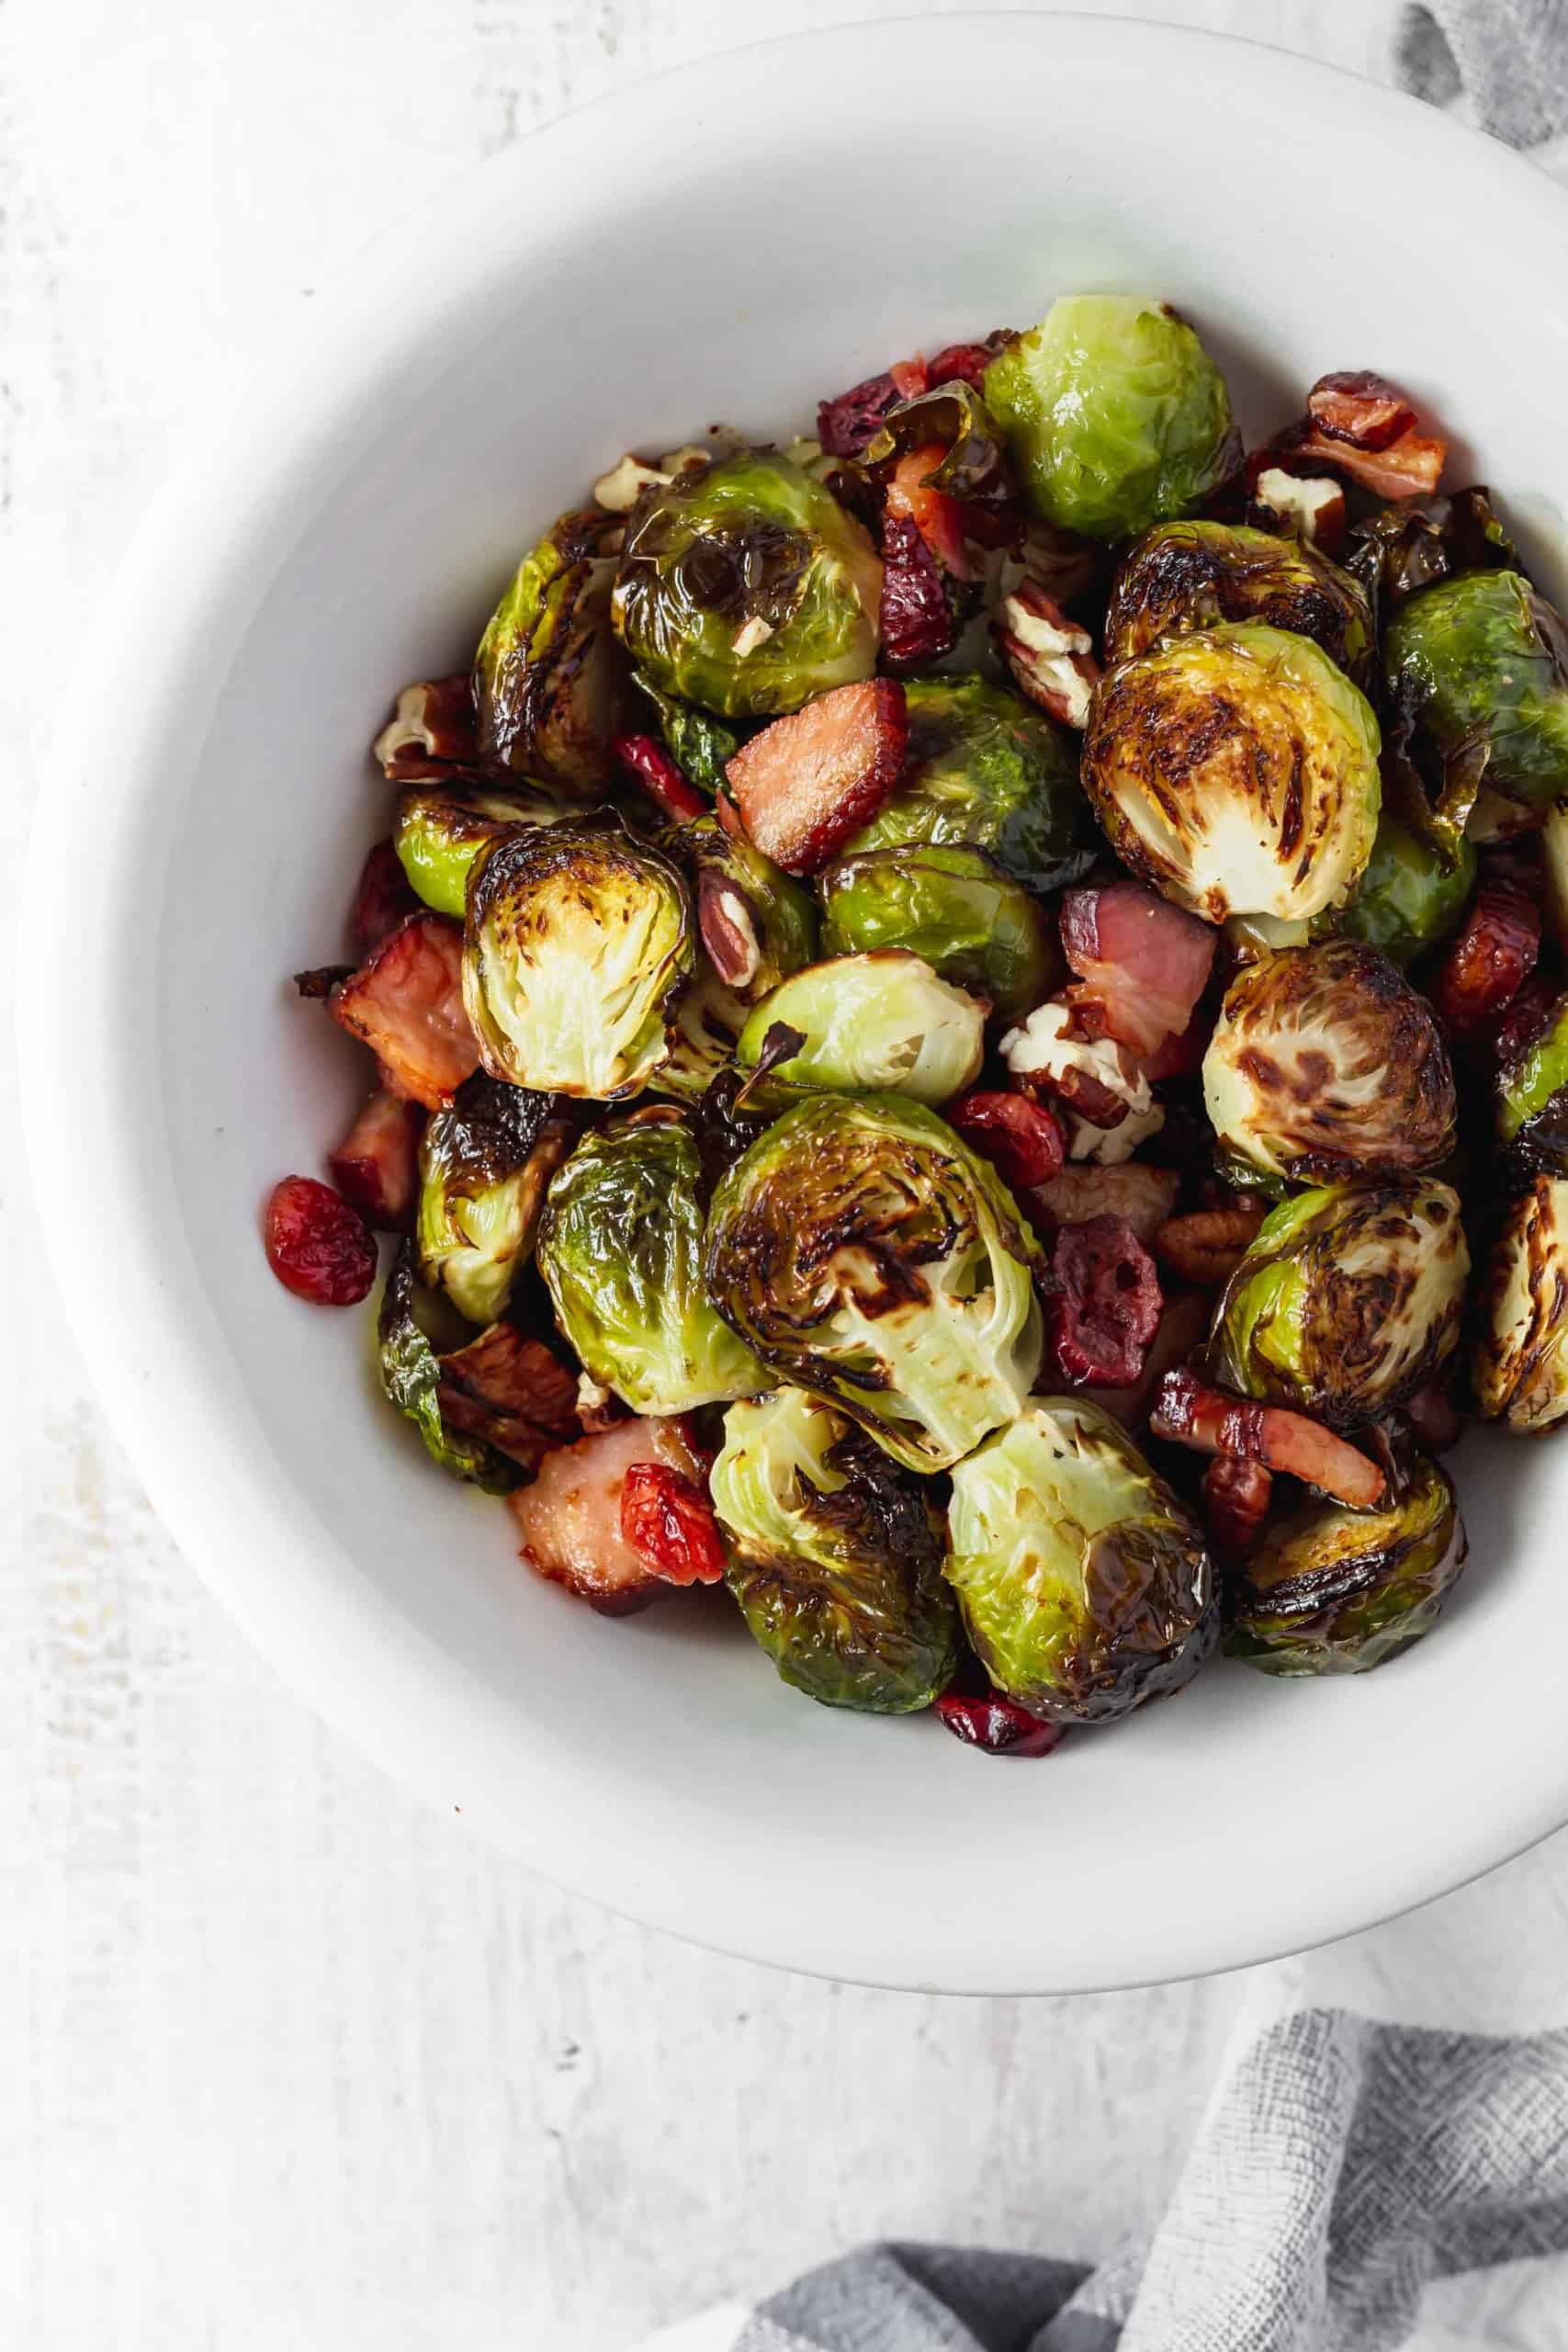 Brussels sprouts that don't suck and are actually delicious! Brussels sprouts are roasted with bacon, dried cranberries, and pecans. #roastedbrusselssprouts #brusselssprouts #thanksgivingsidedish #thanksgivingdinner #sprouts